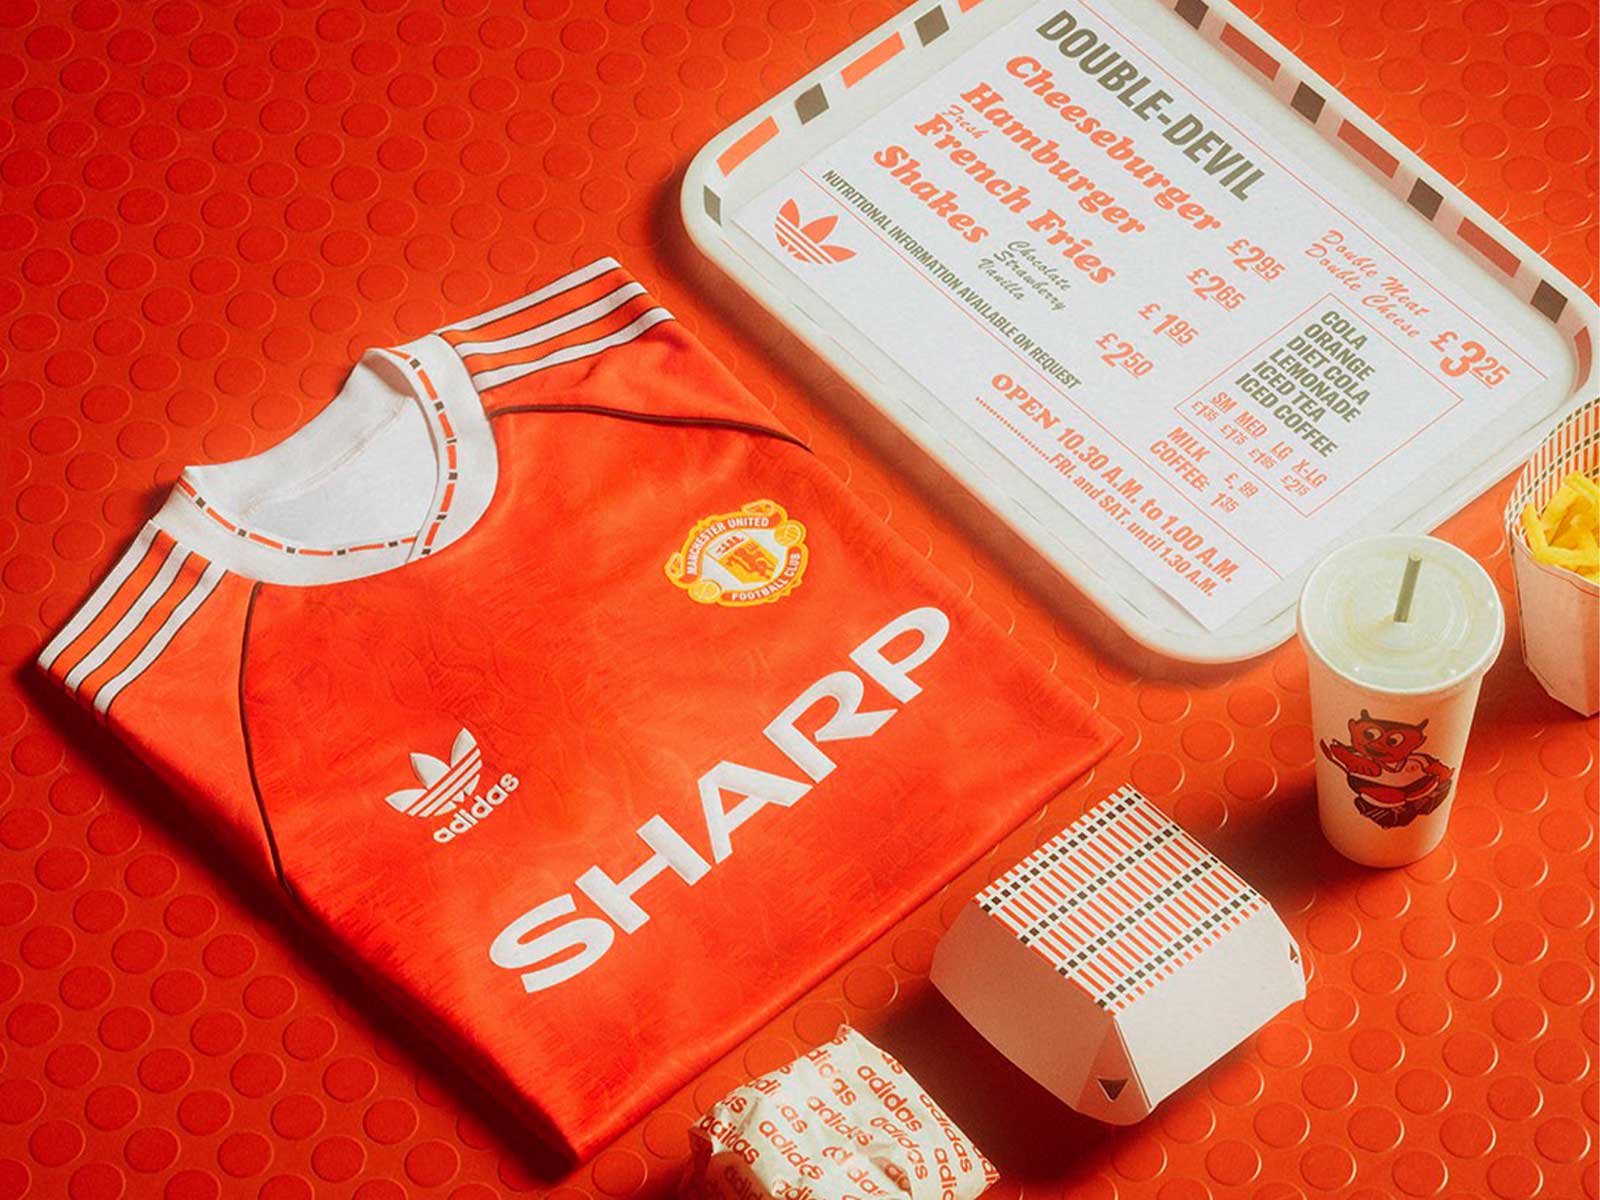 adidas Originals and MUFC bring back the nineties aesthetic